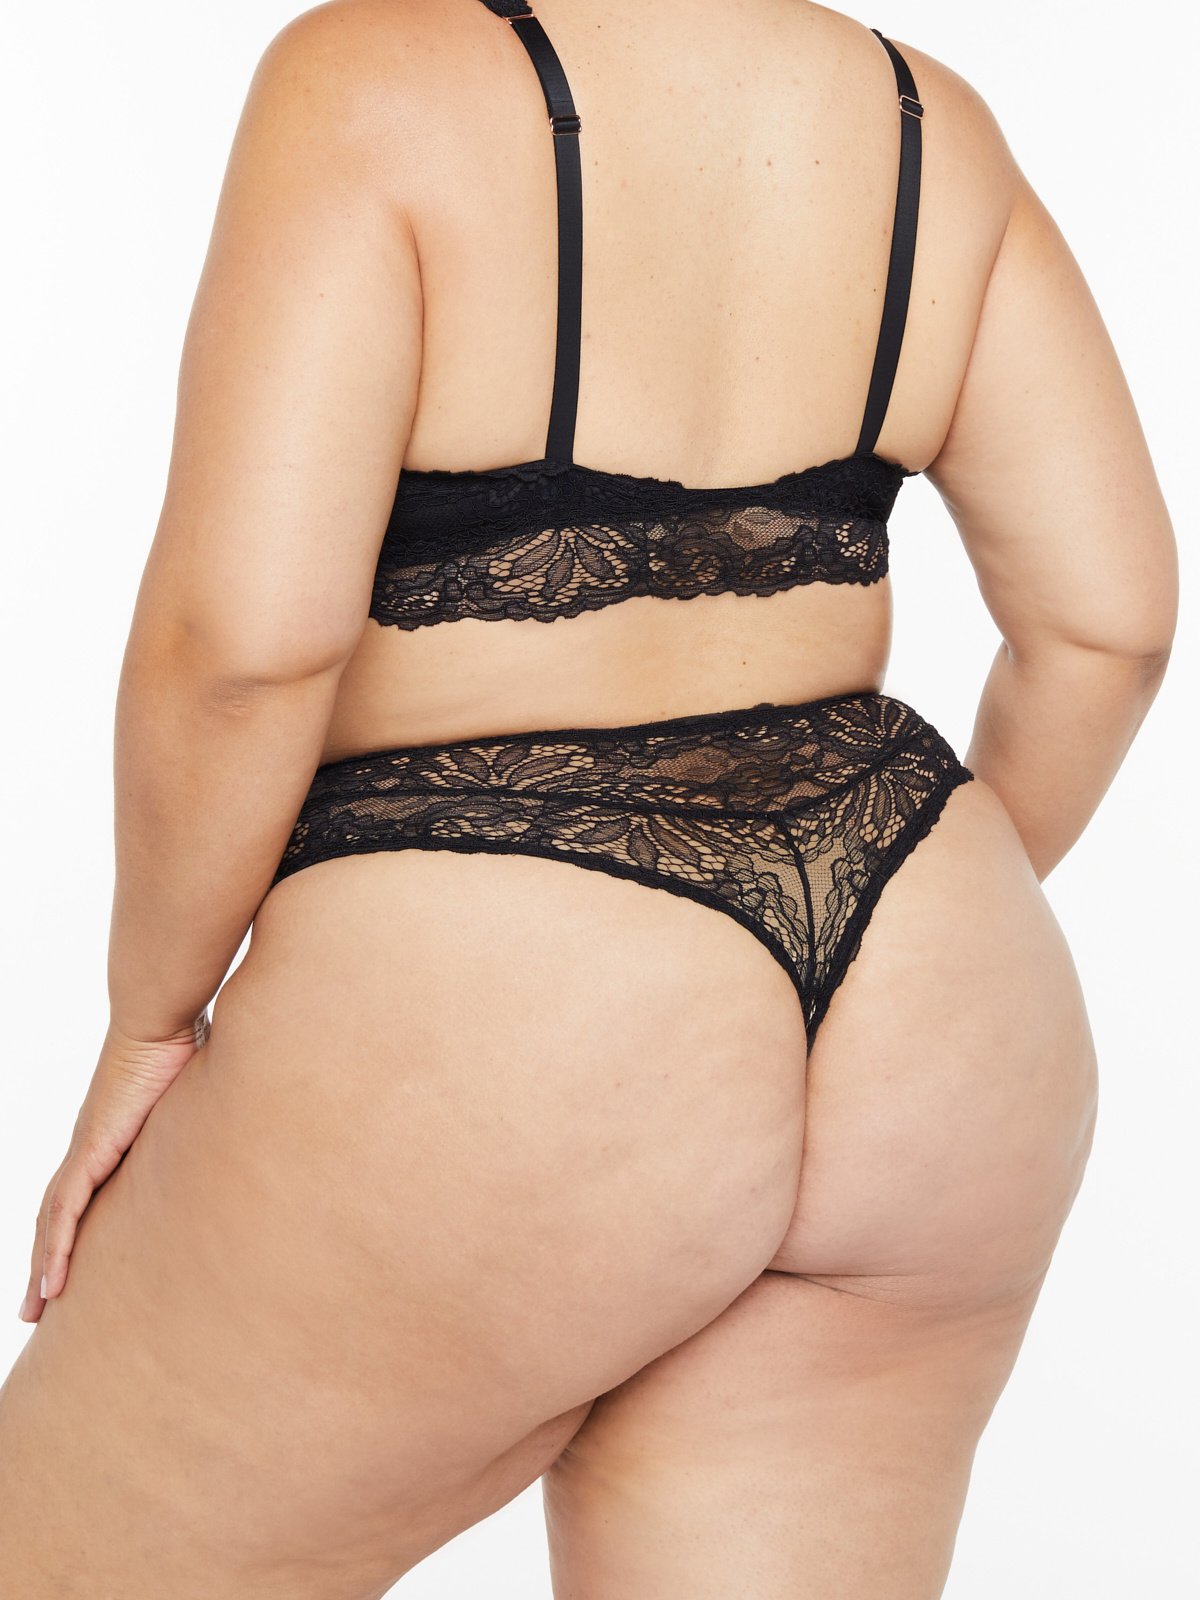 https://cdn.savagex.com/media/images/products/UD2148533-0687/ROMANTIC-CORDED-LACE-HIGH-WAIST-THONG-UD2148533-0687-2-1200x1600.jpg